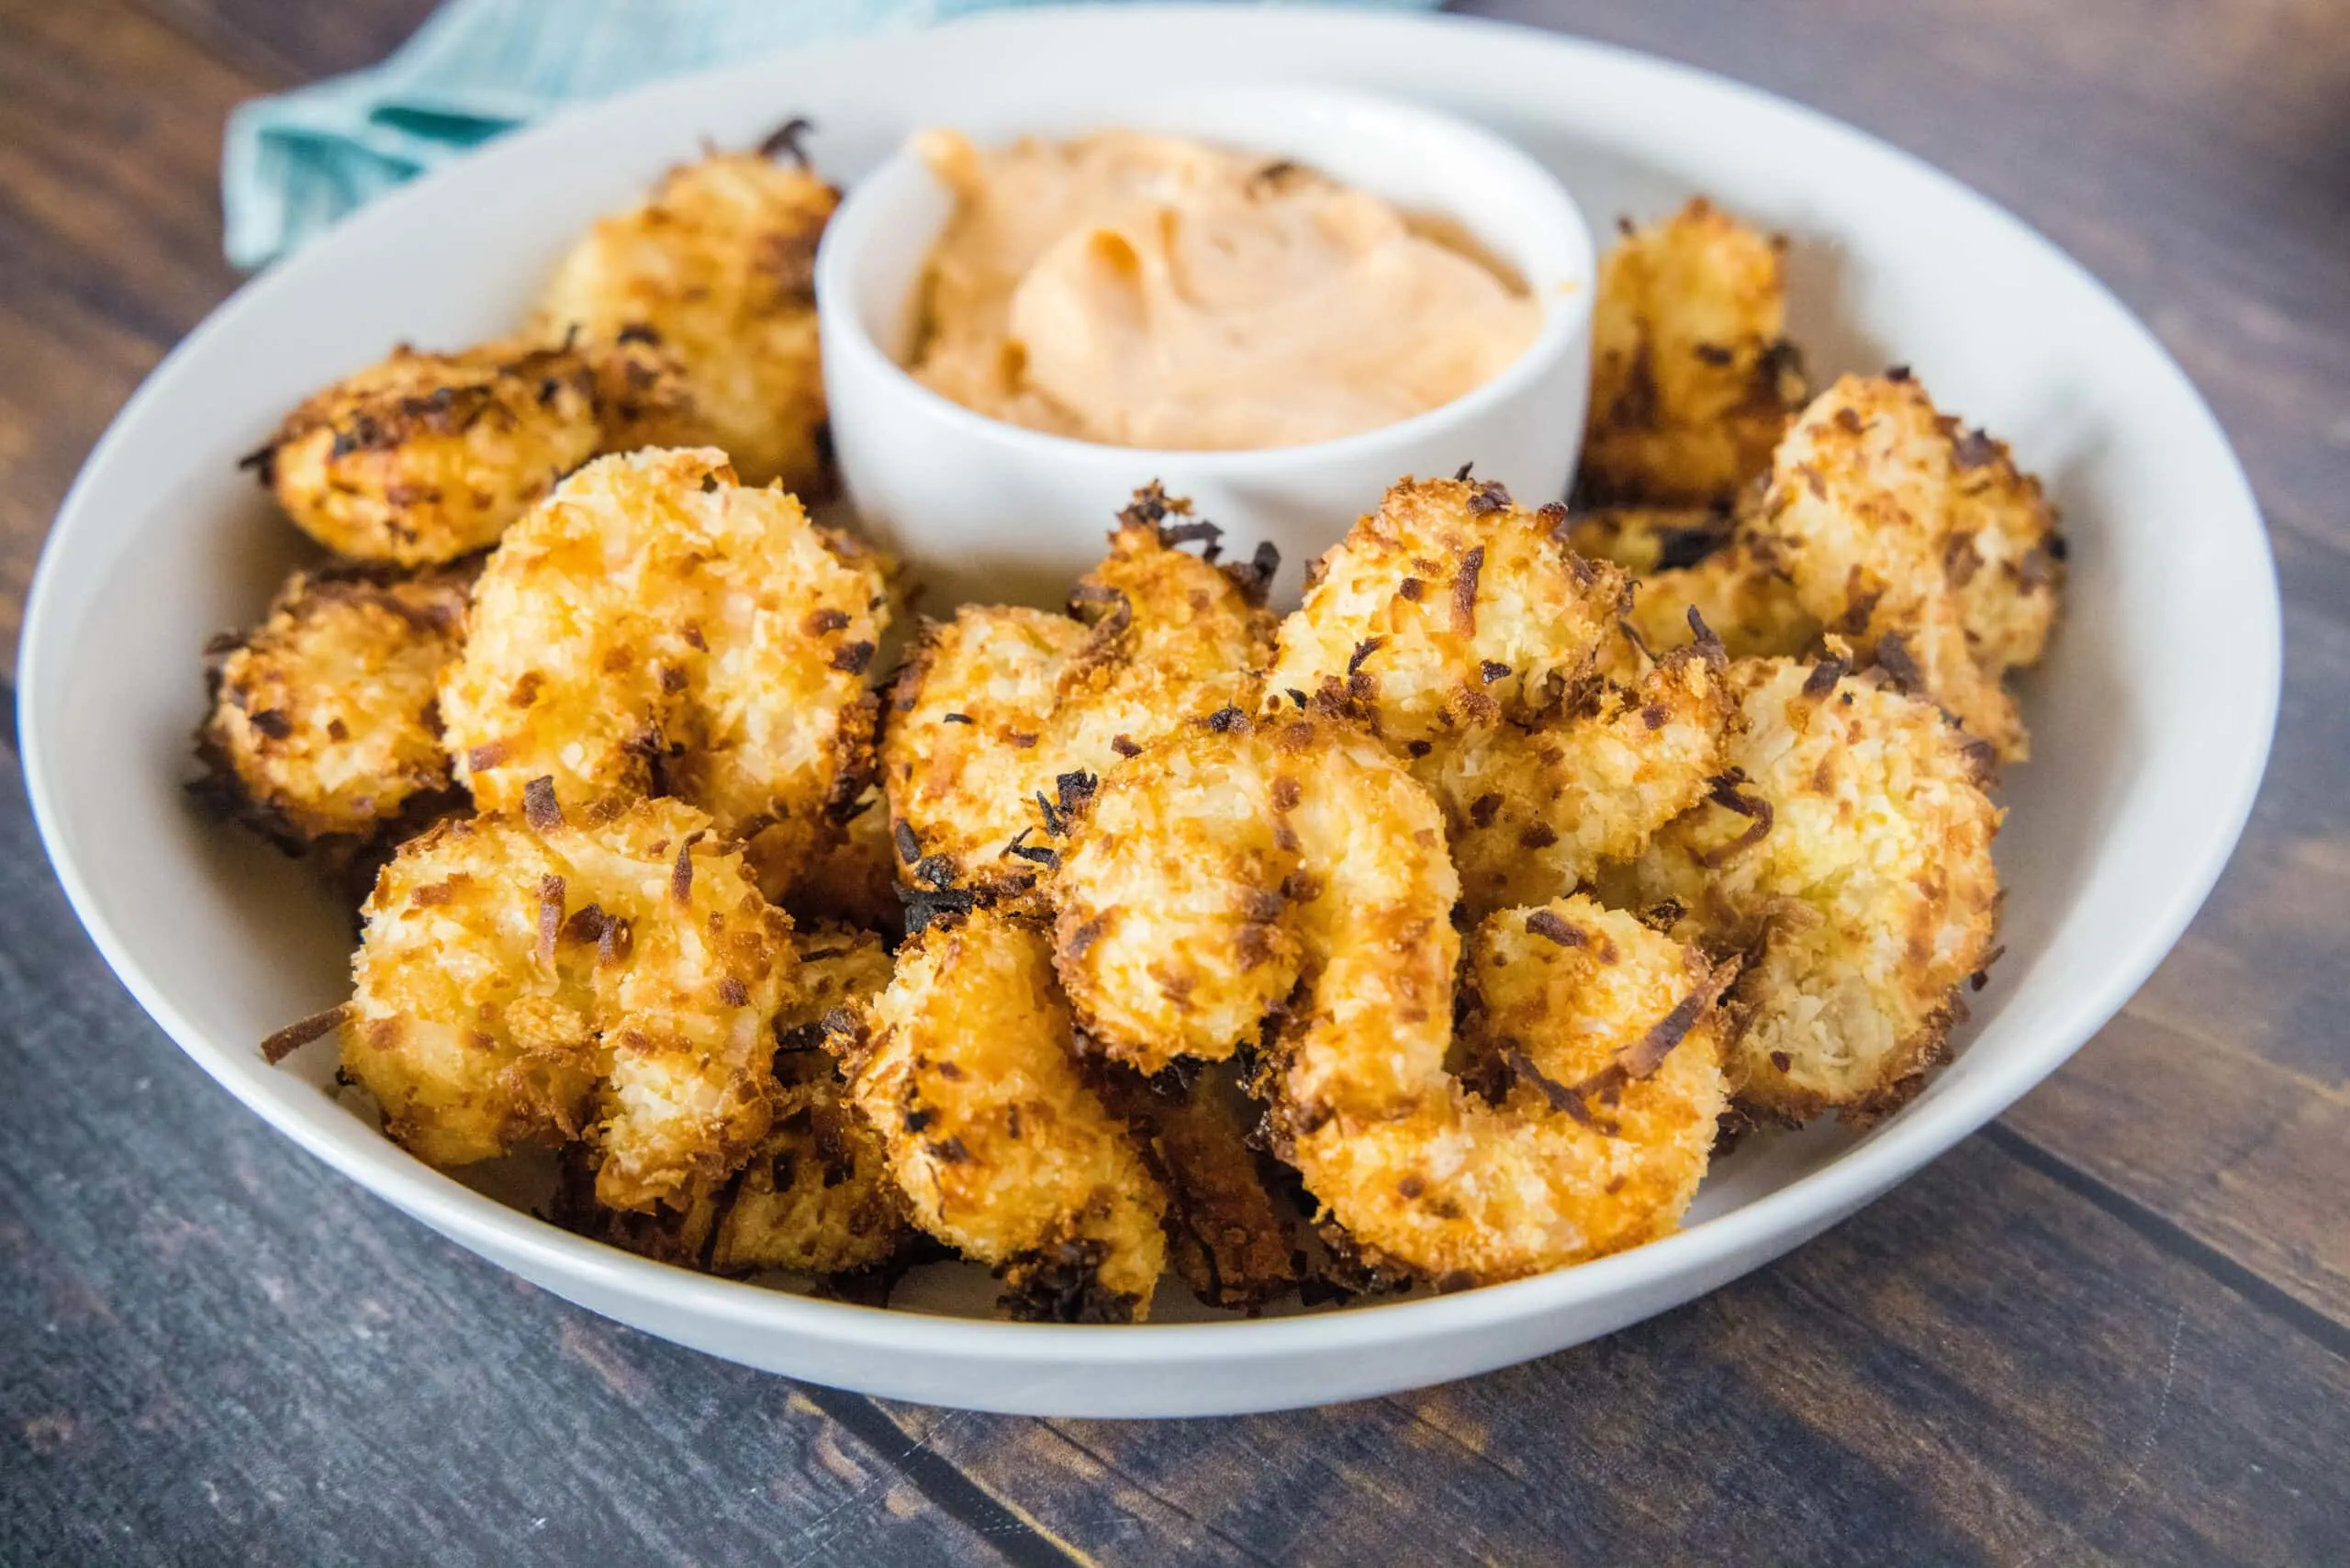 Air Fryer Coconut Shrimp - crispy coconut crusted shrimp cooked in the air fryer (oven recipe included). Super crispy, crunchy, slightly sweet and delicious.